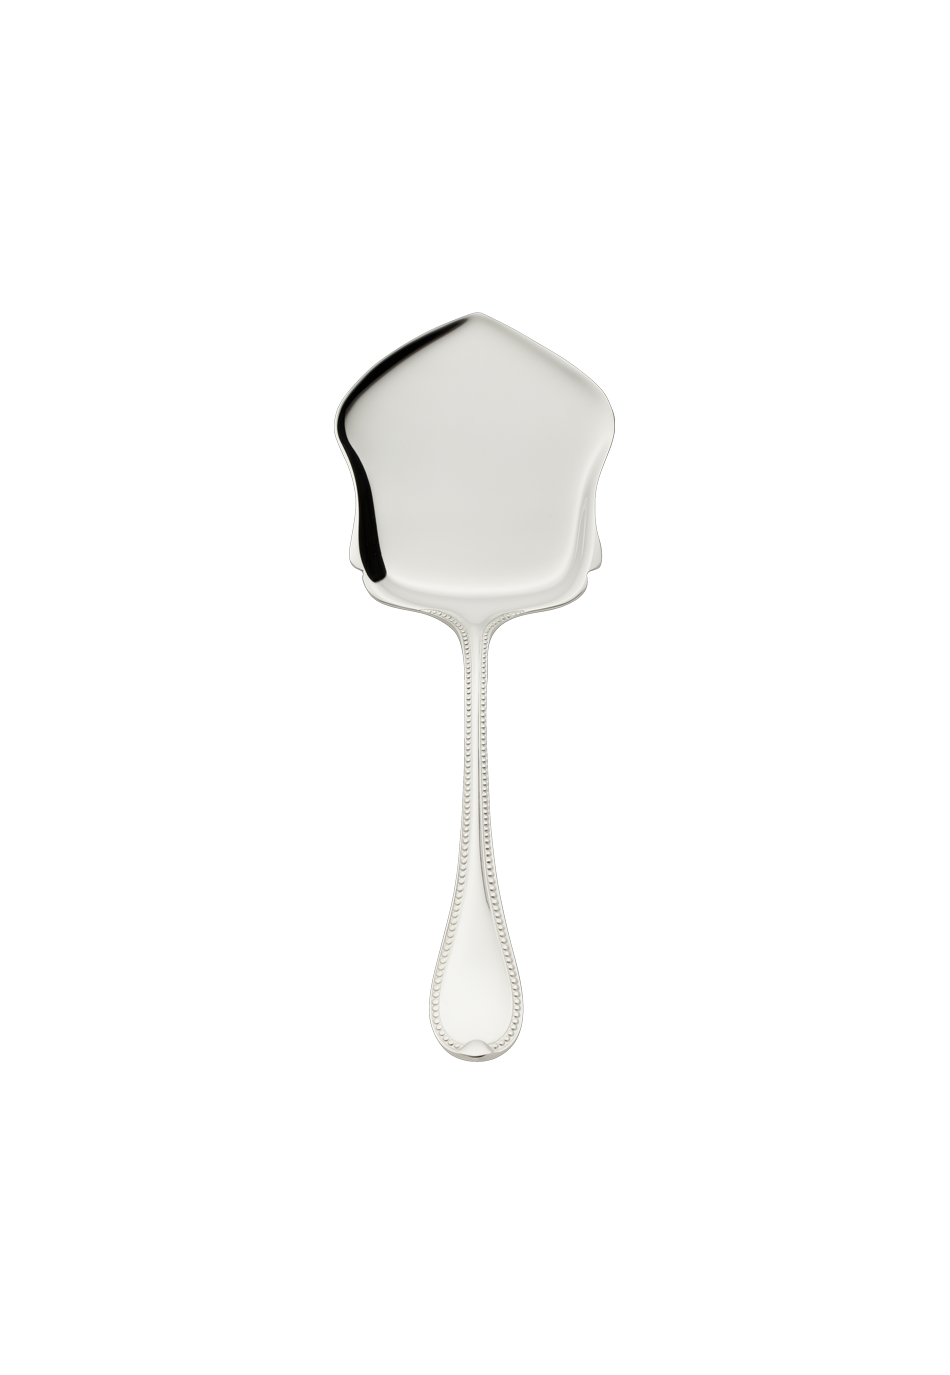 Franz. Perl Pastry Server (150g massive silverplated)